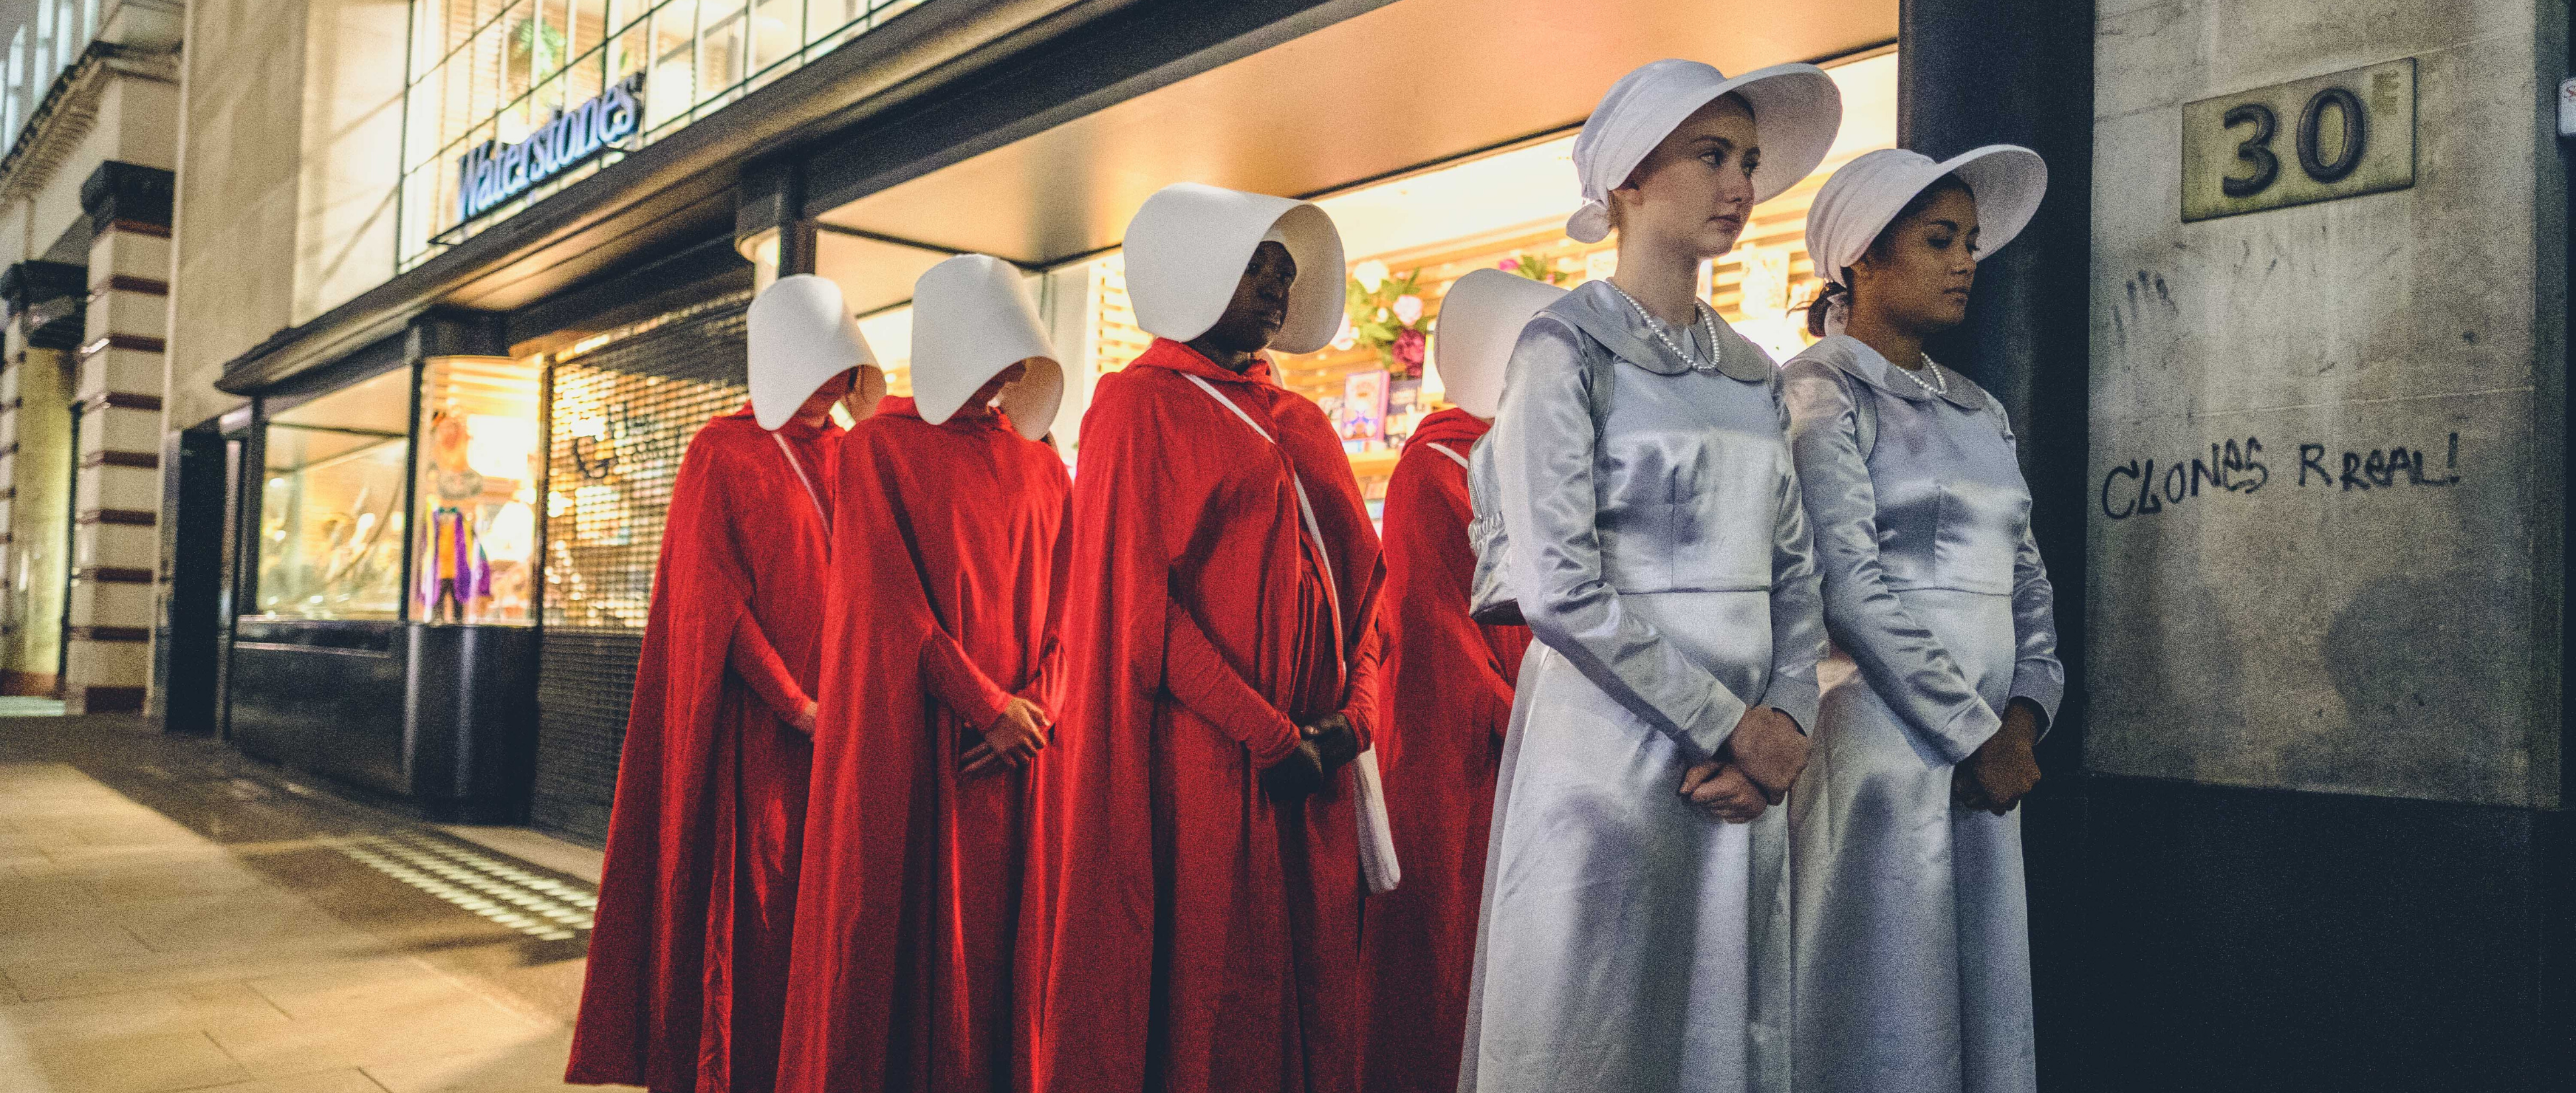 Handmaids and Pearl Girls outside Waterstones Piccadilly